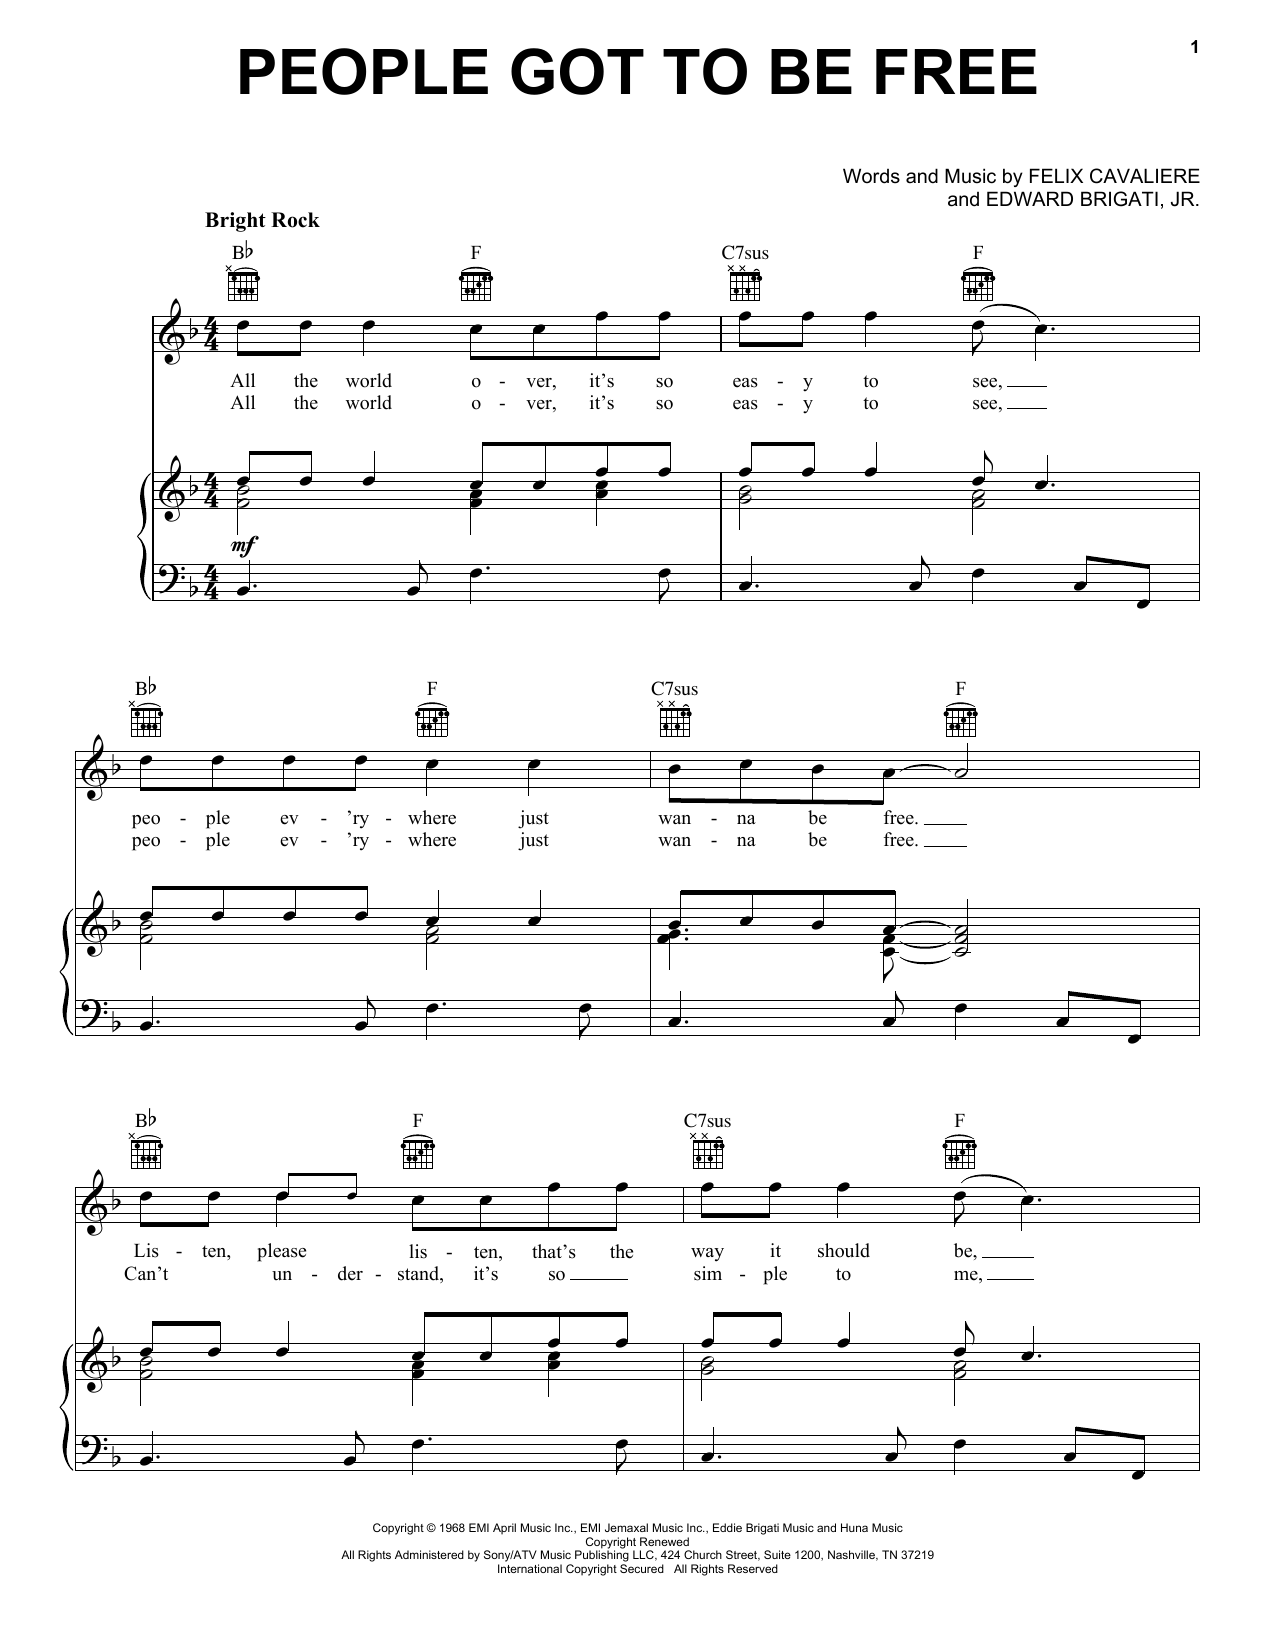 Download The Rascals People Got To Be Free Sheet Music